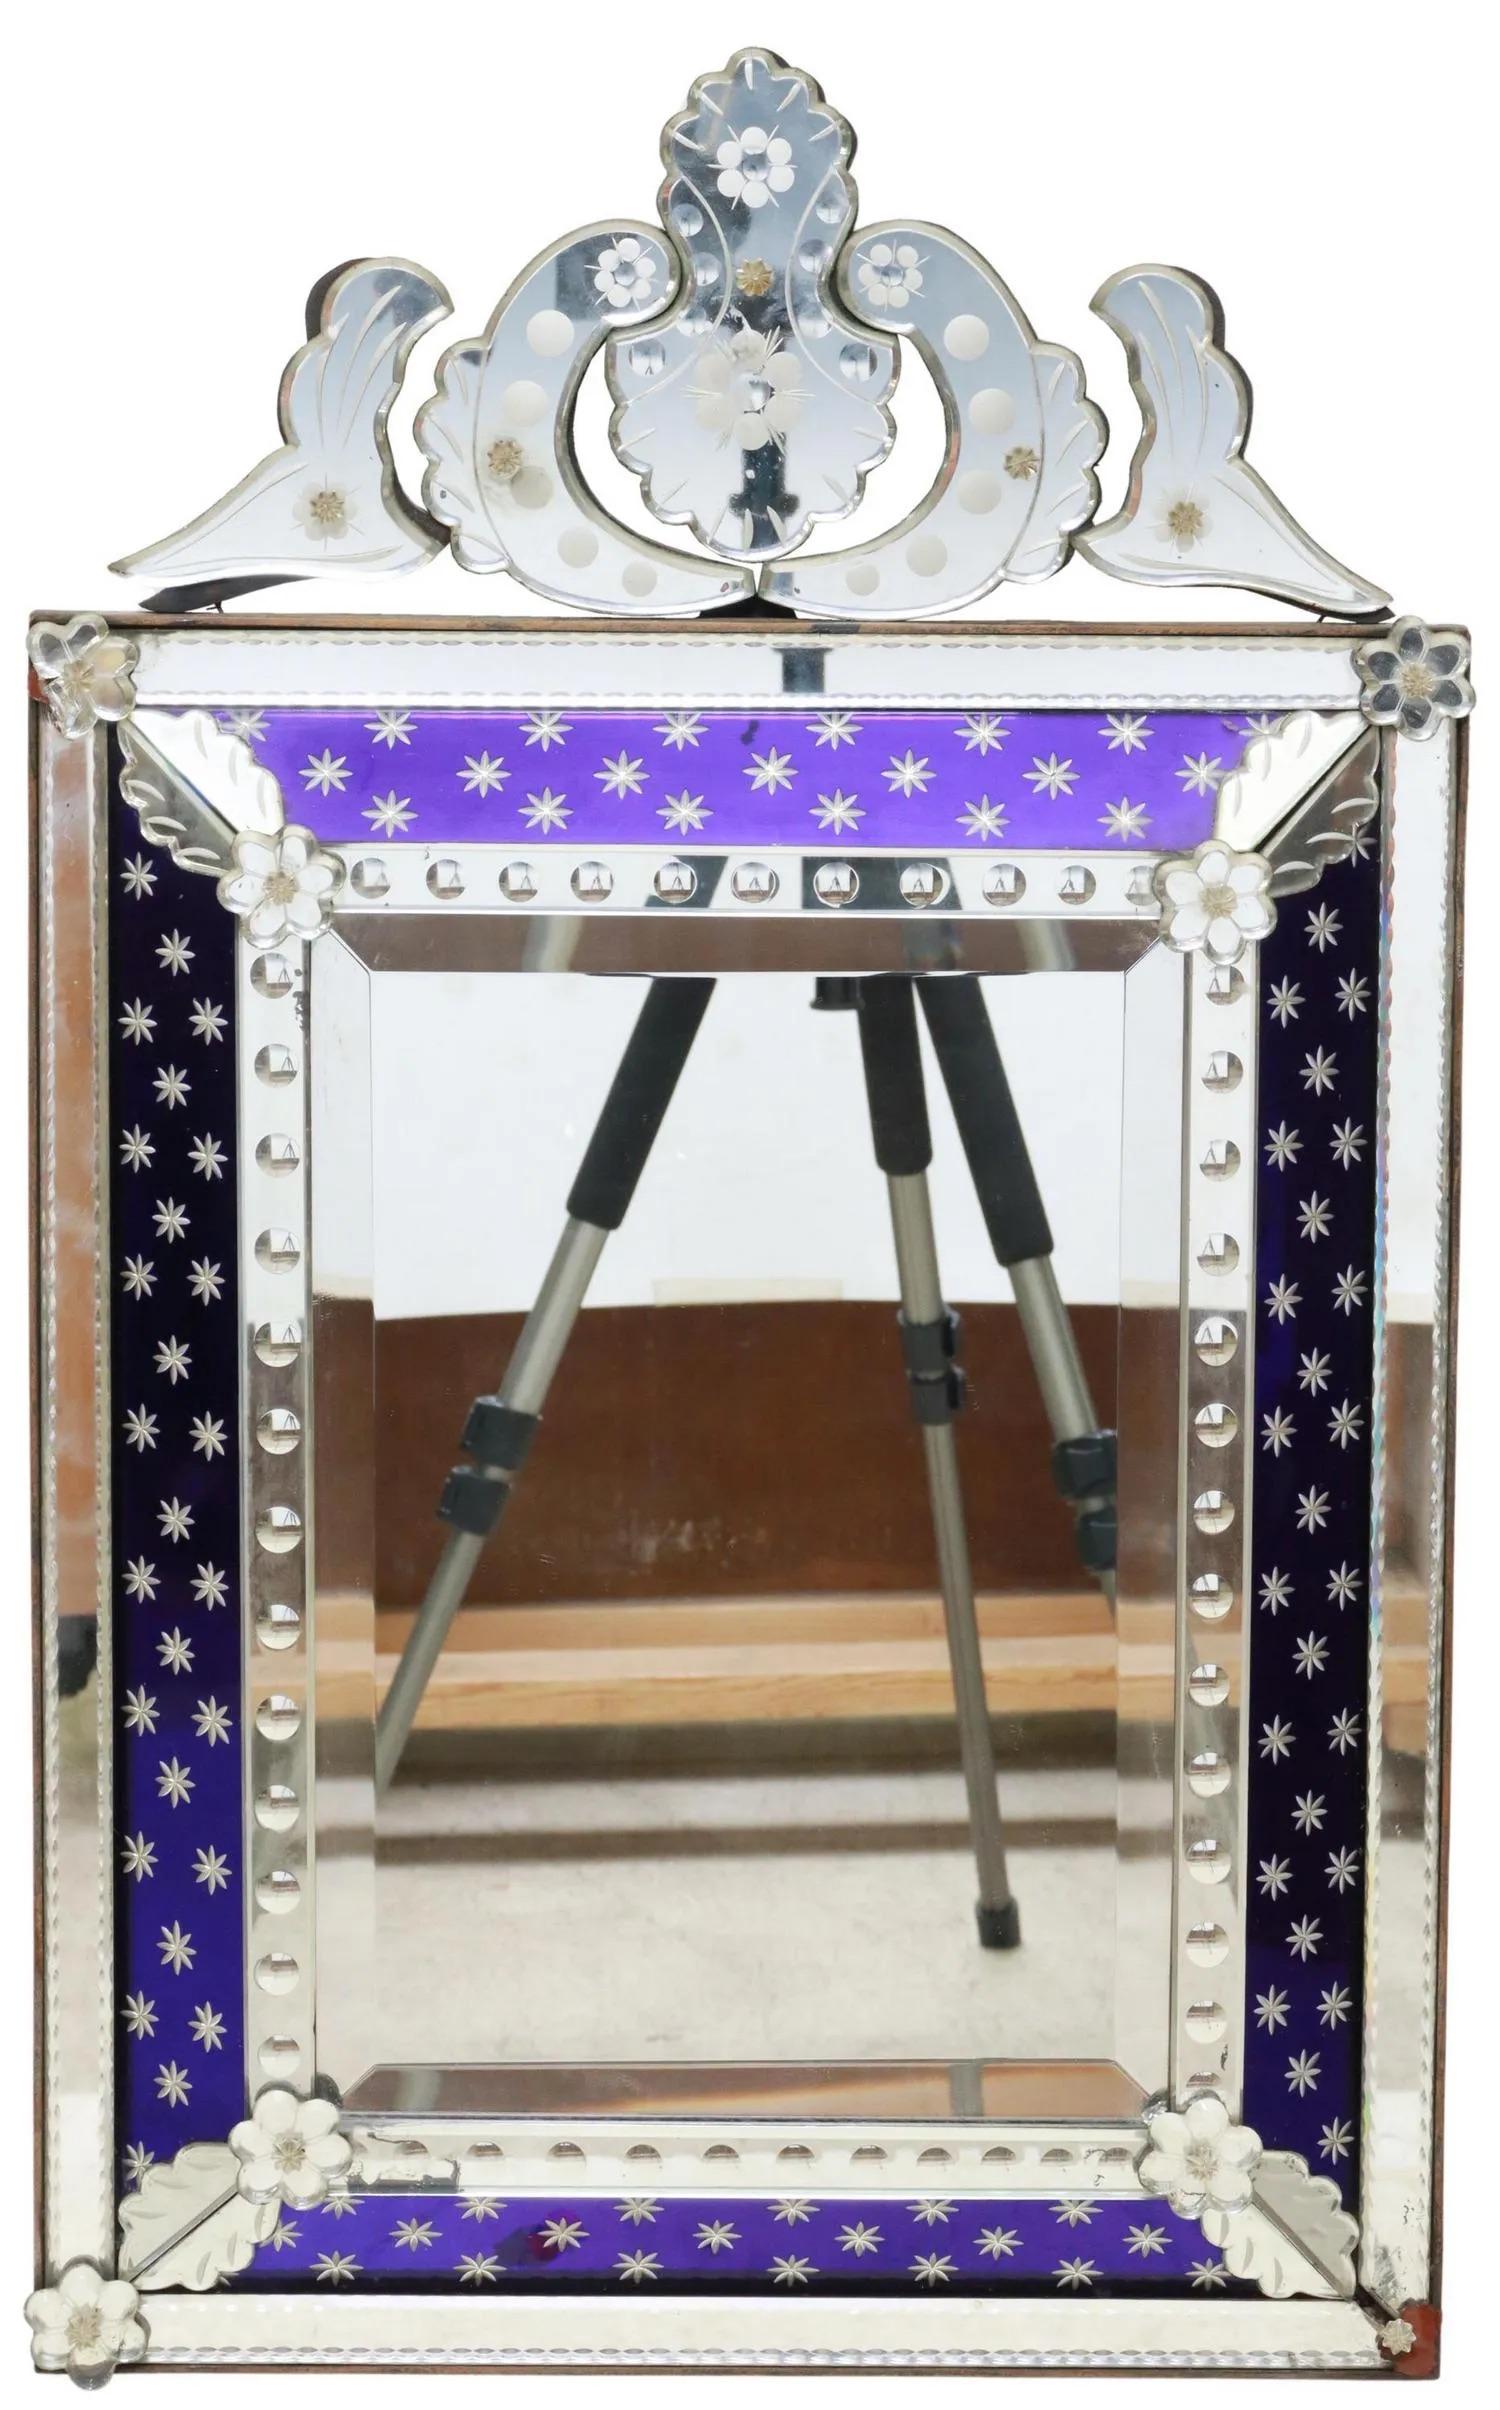 Venetian style mirror, late 20th c., etched crest, cobalt blue glass border, beveled mirror plate, losses to corner rosettes. 

Dimensions: approx 31